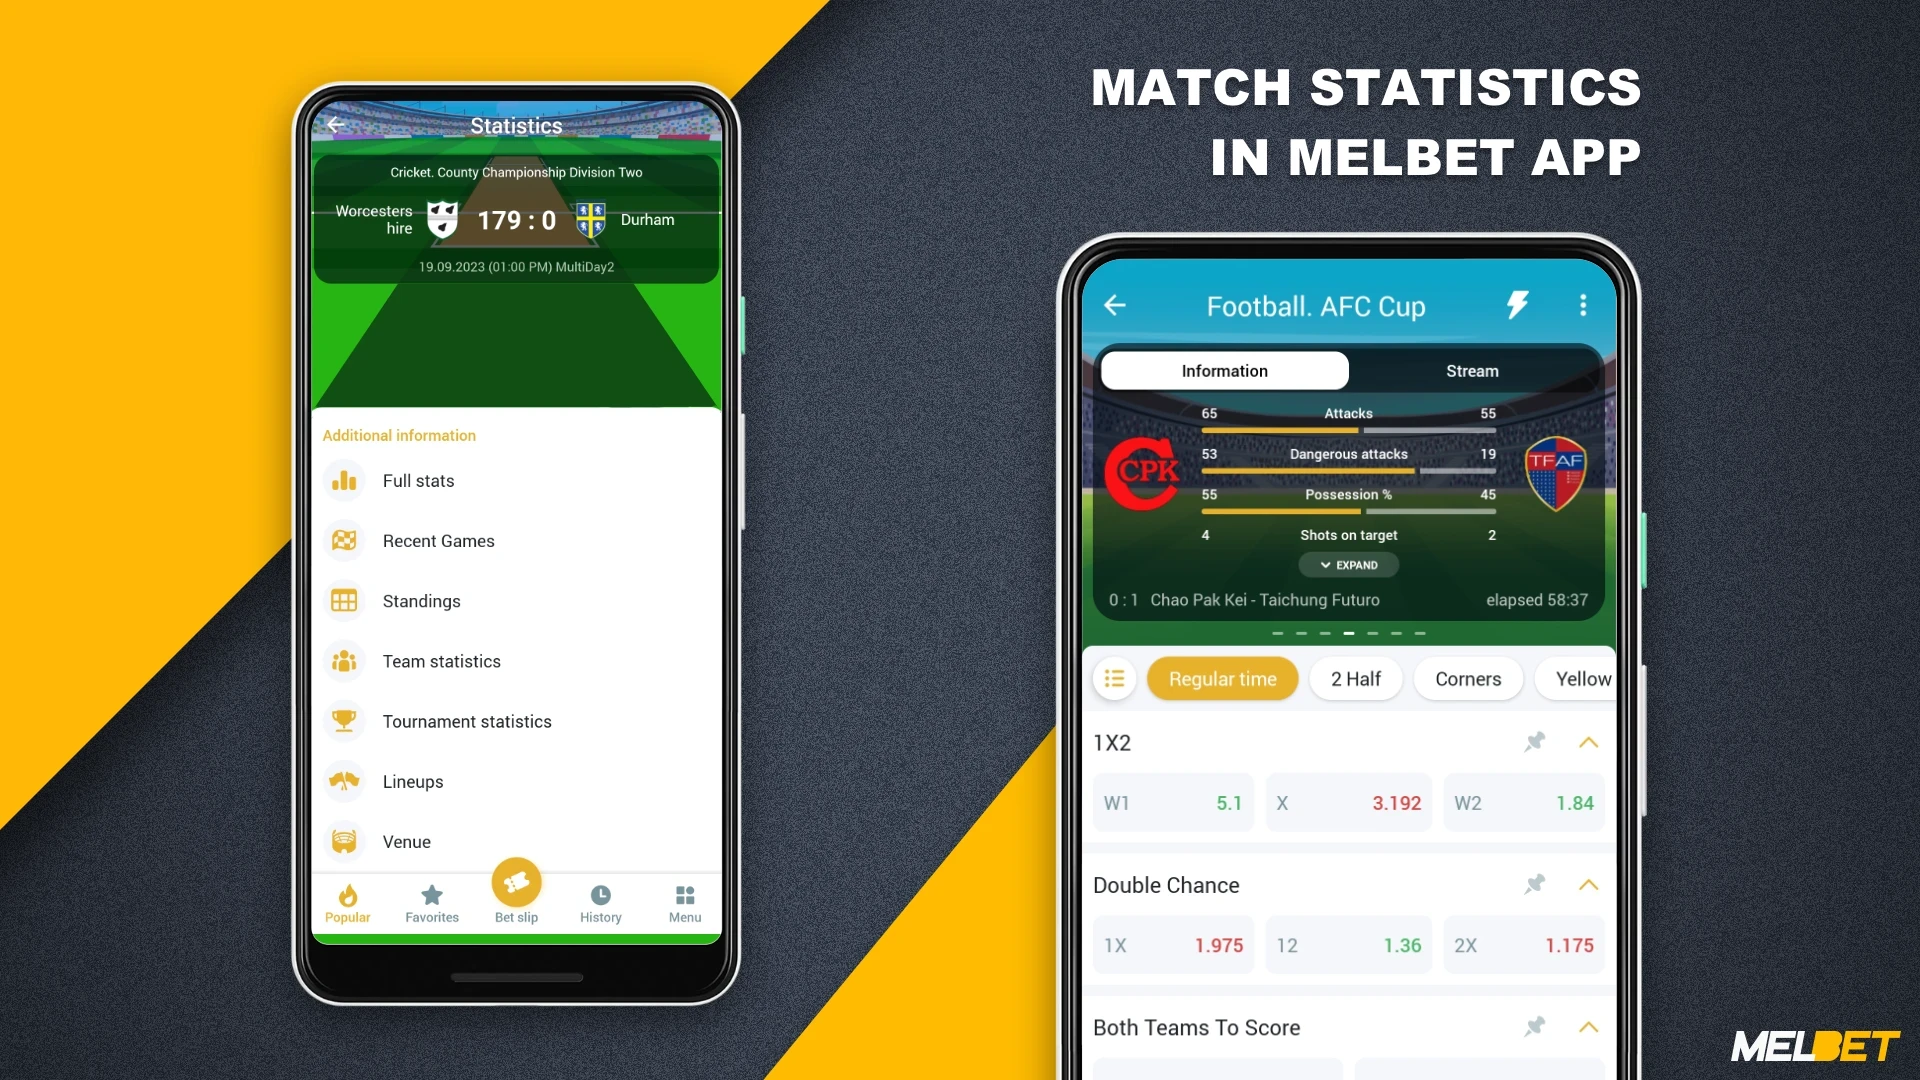 Users of the Melbet app can access detailed match statistics